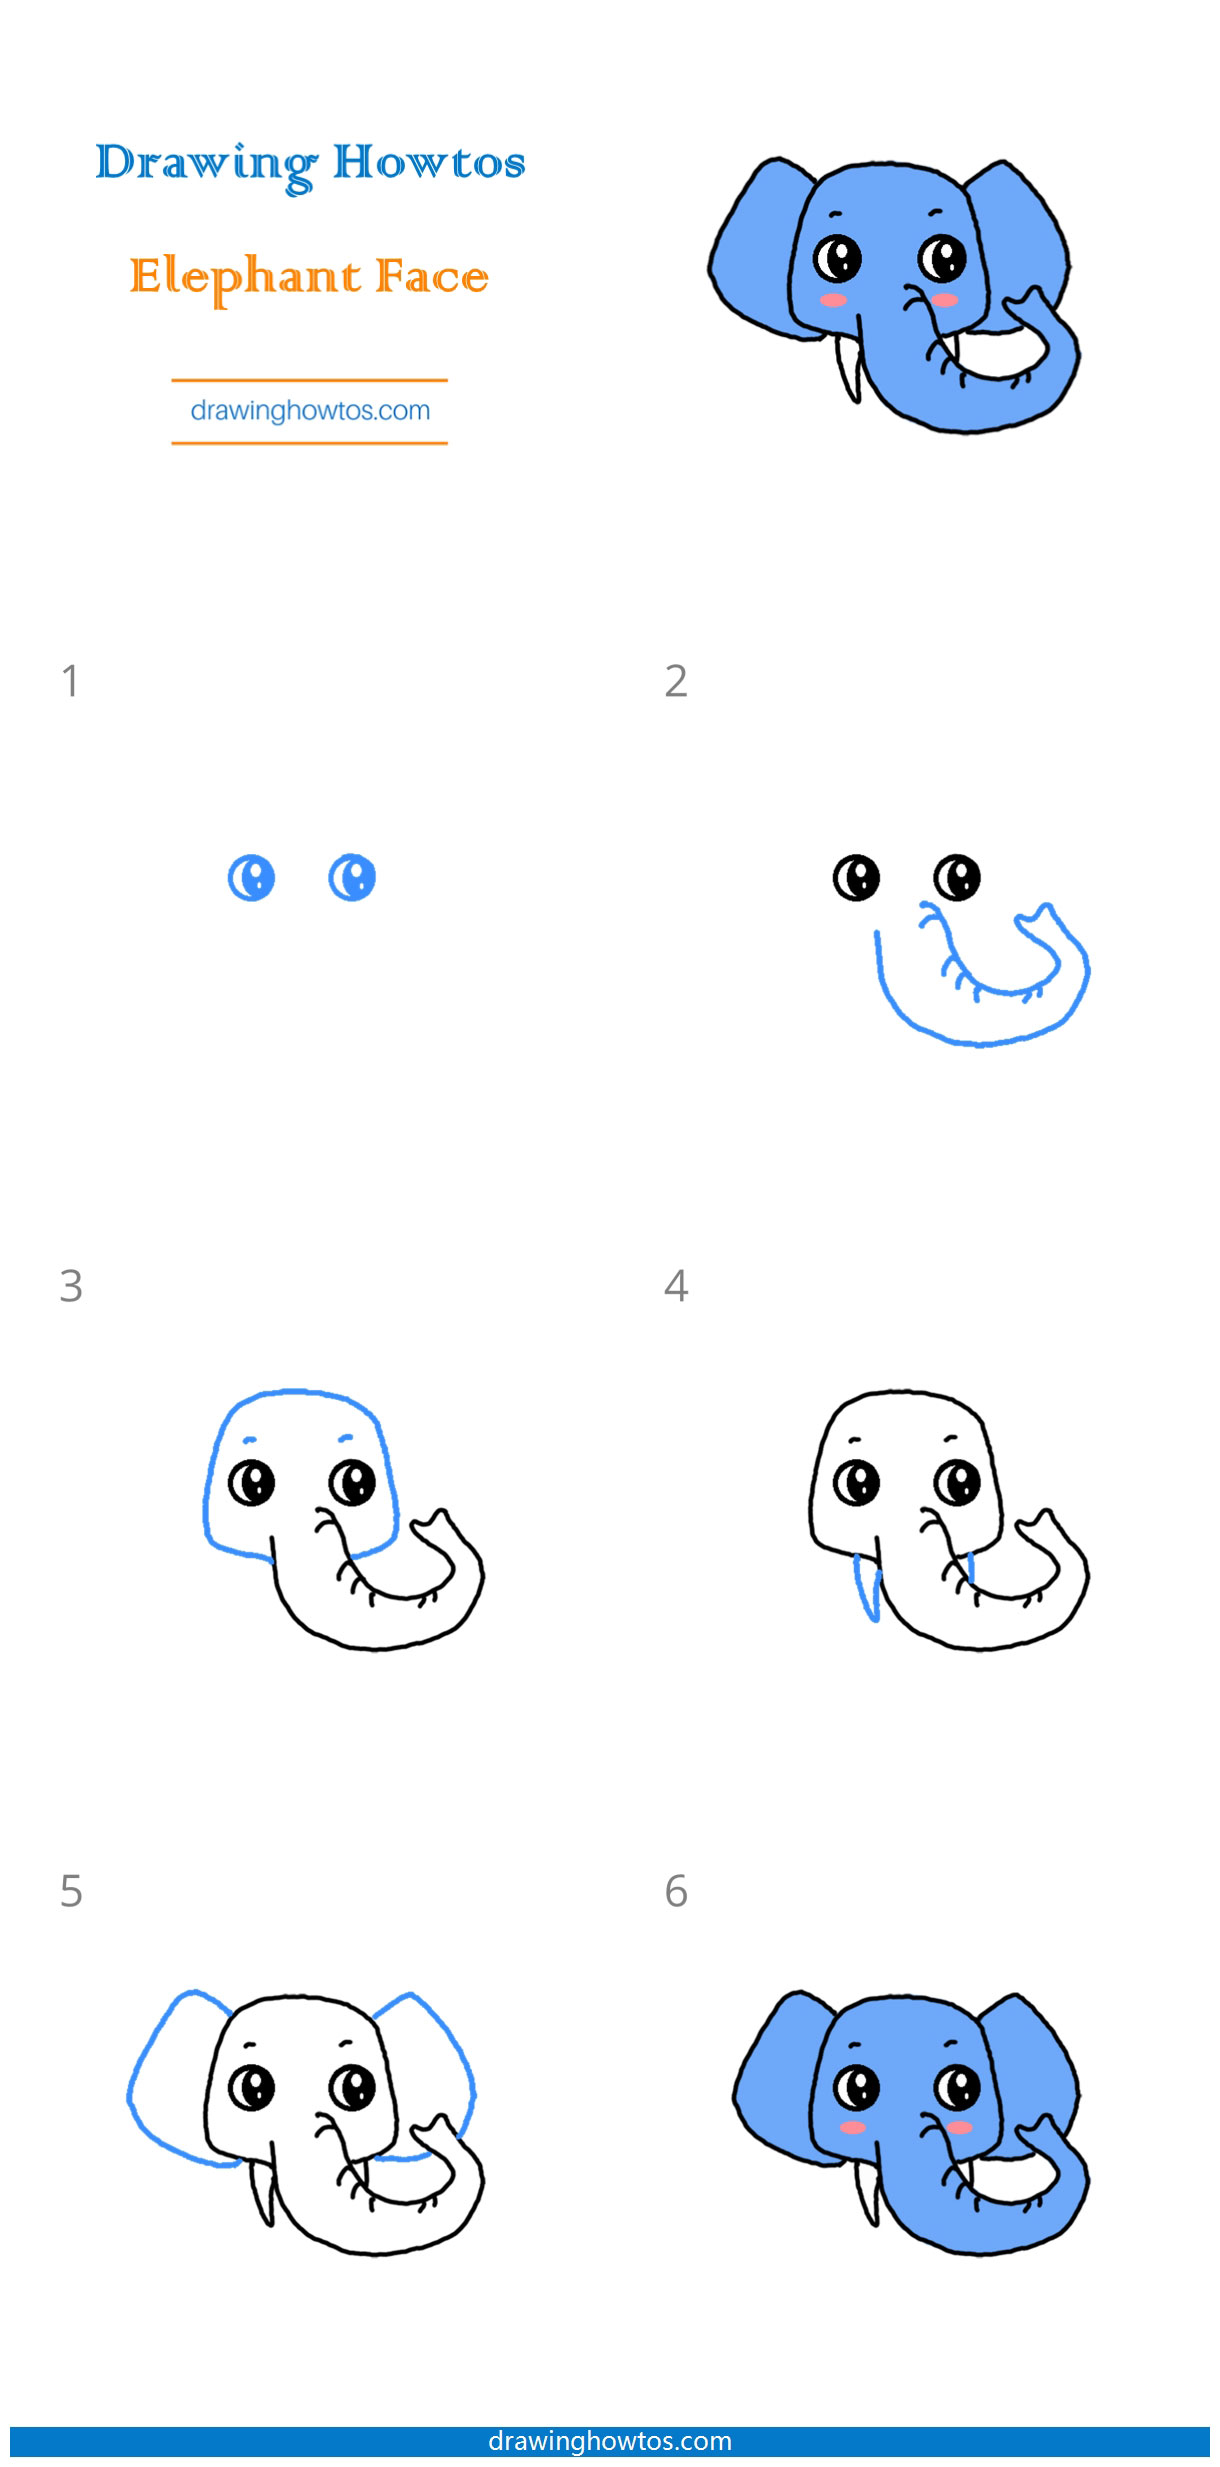 How to Draw an Elephant Face Step by Step